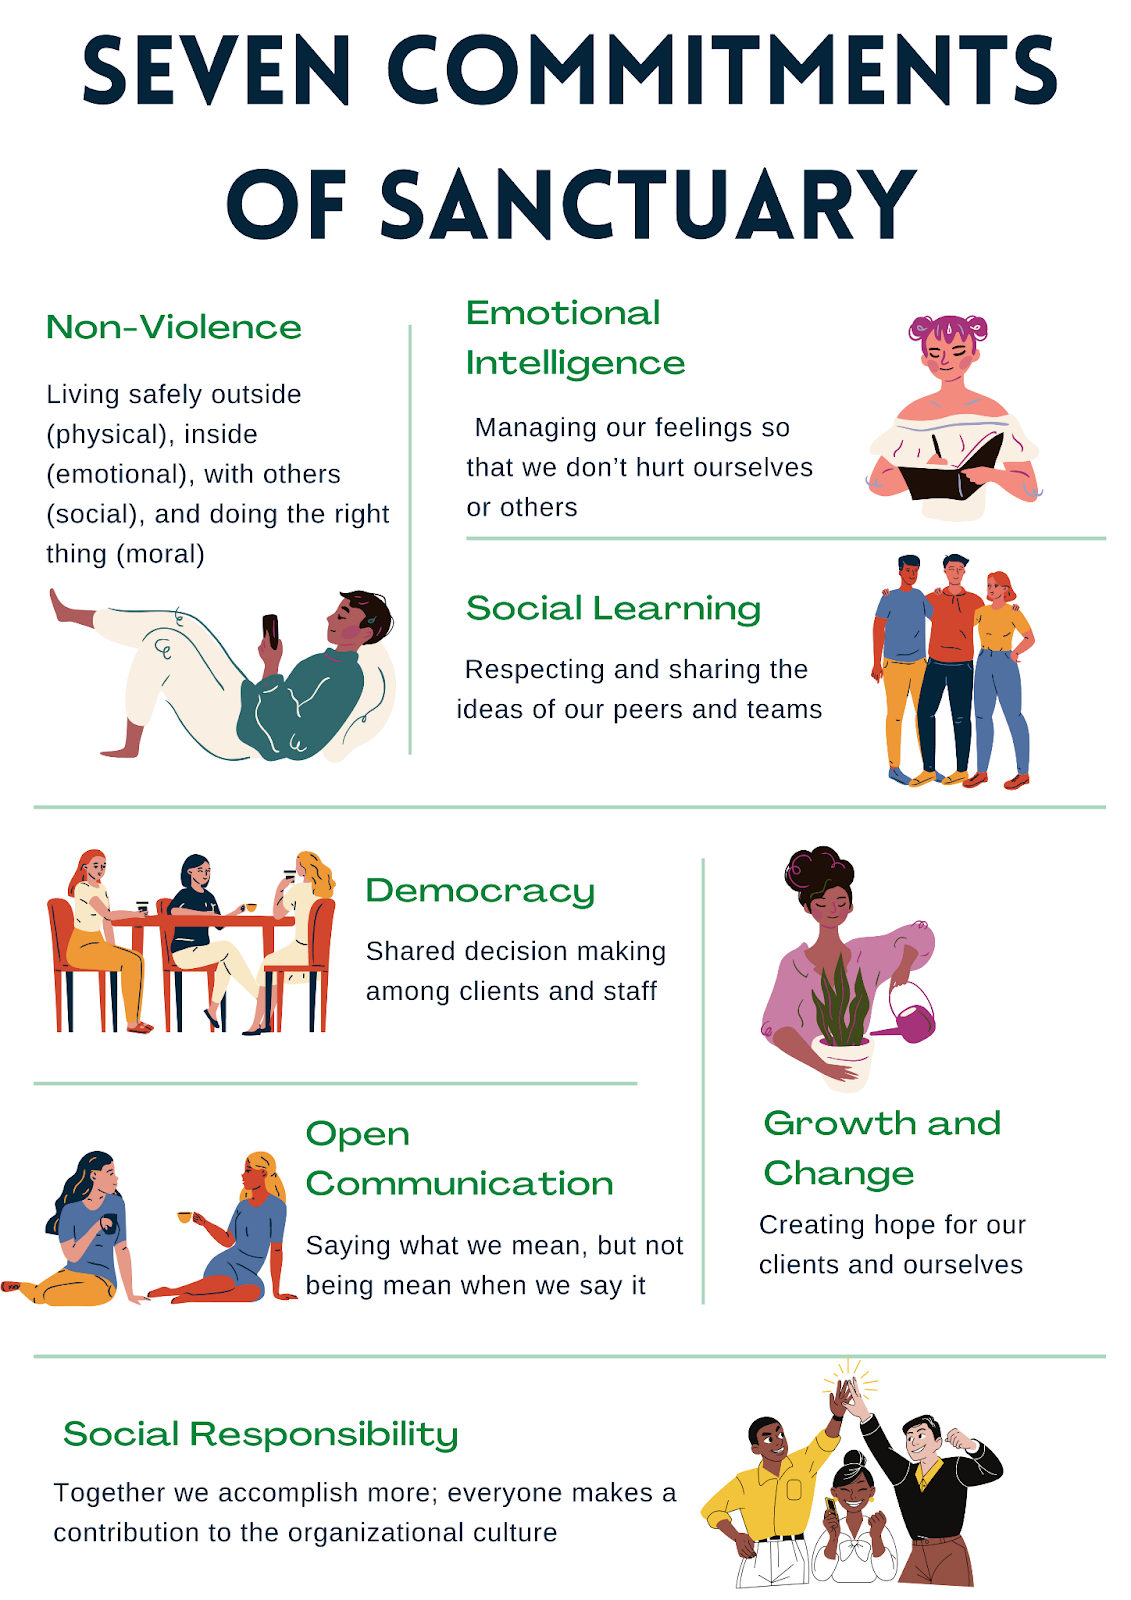 An infographic titled seven commitments of sanctuary. next to clip art the seven commitments are listed as non-violence, emotional intelligence, social learning, democracy, open communication, growth and change, and social responsibility